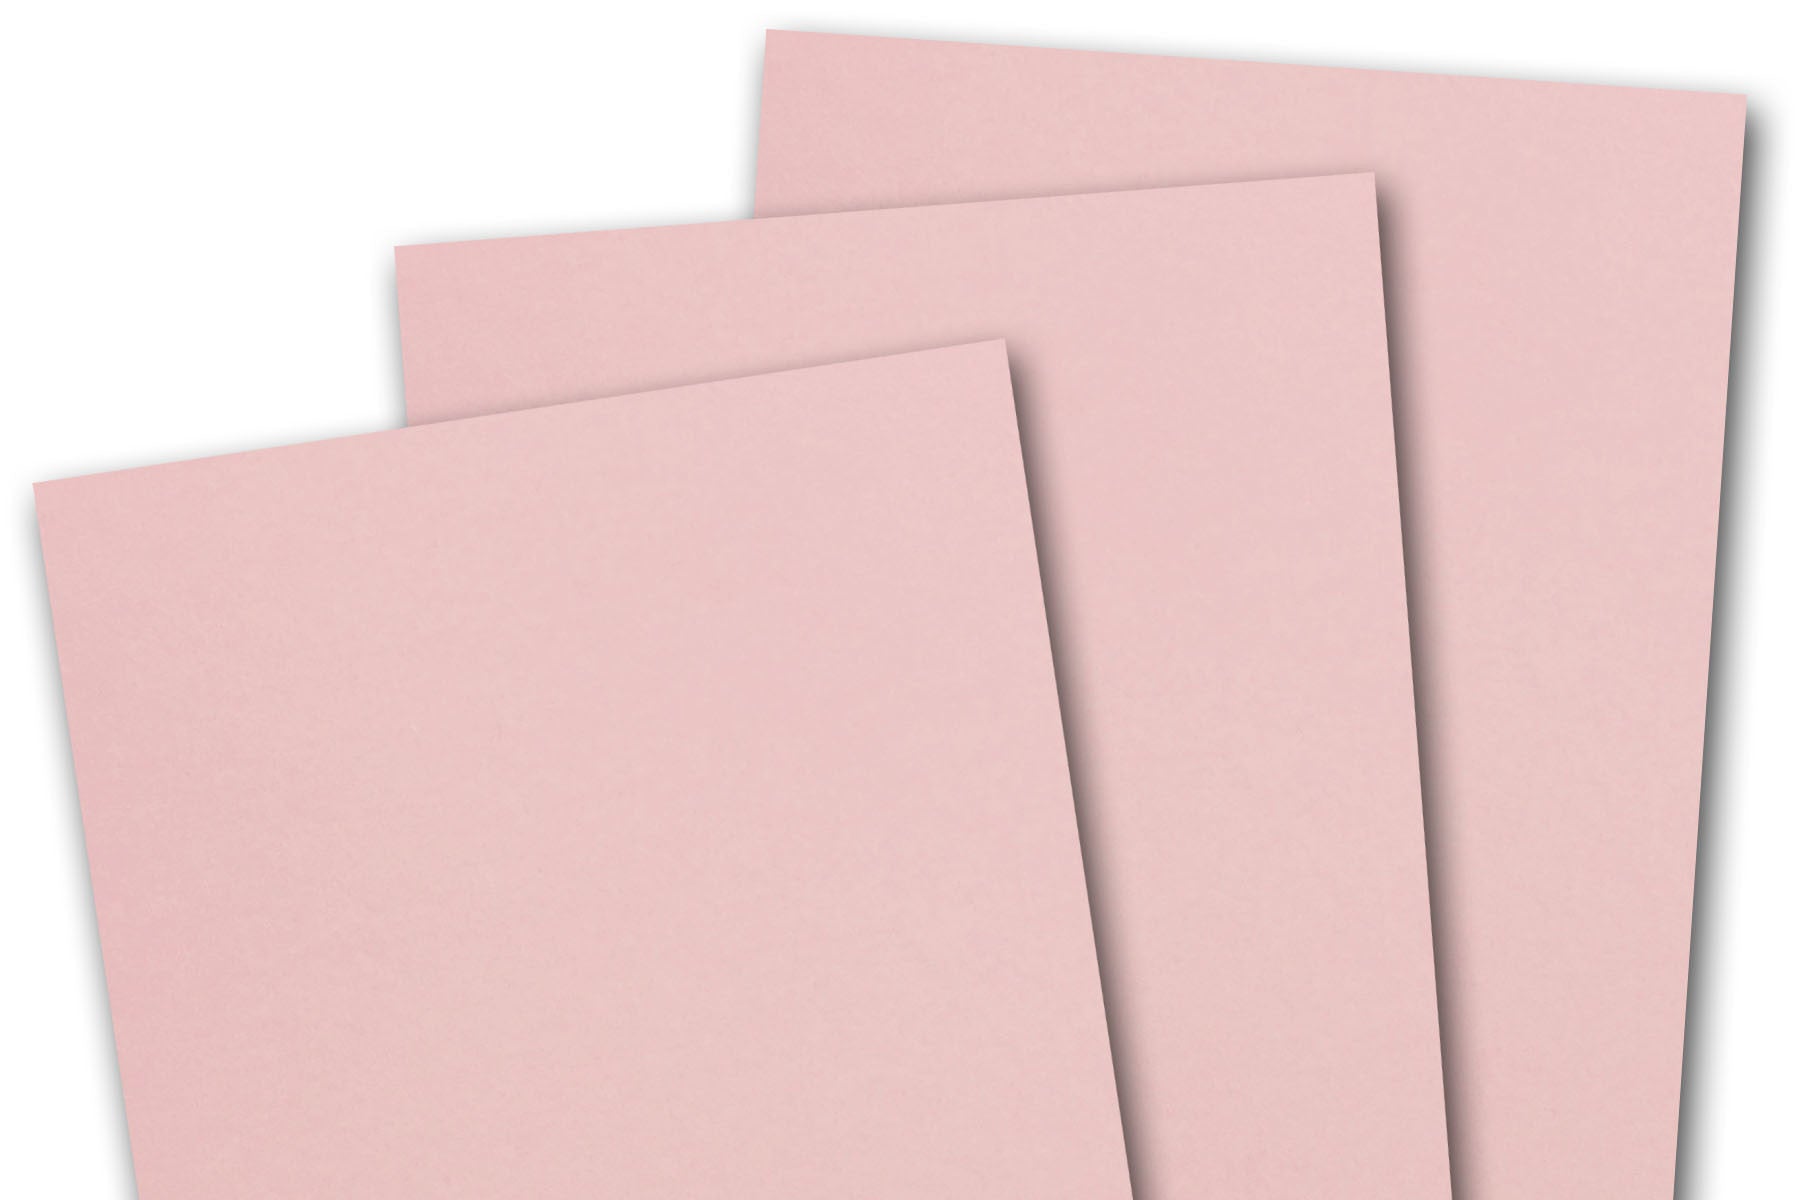 Buy 5.5 Bar, A2 Size, Basis Brand Colored Card Stock, Pink, 5.5x4.25